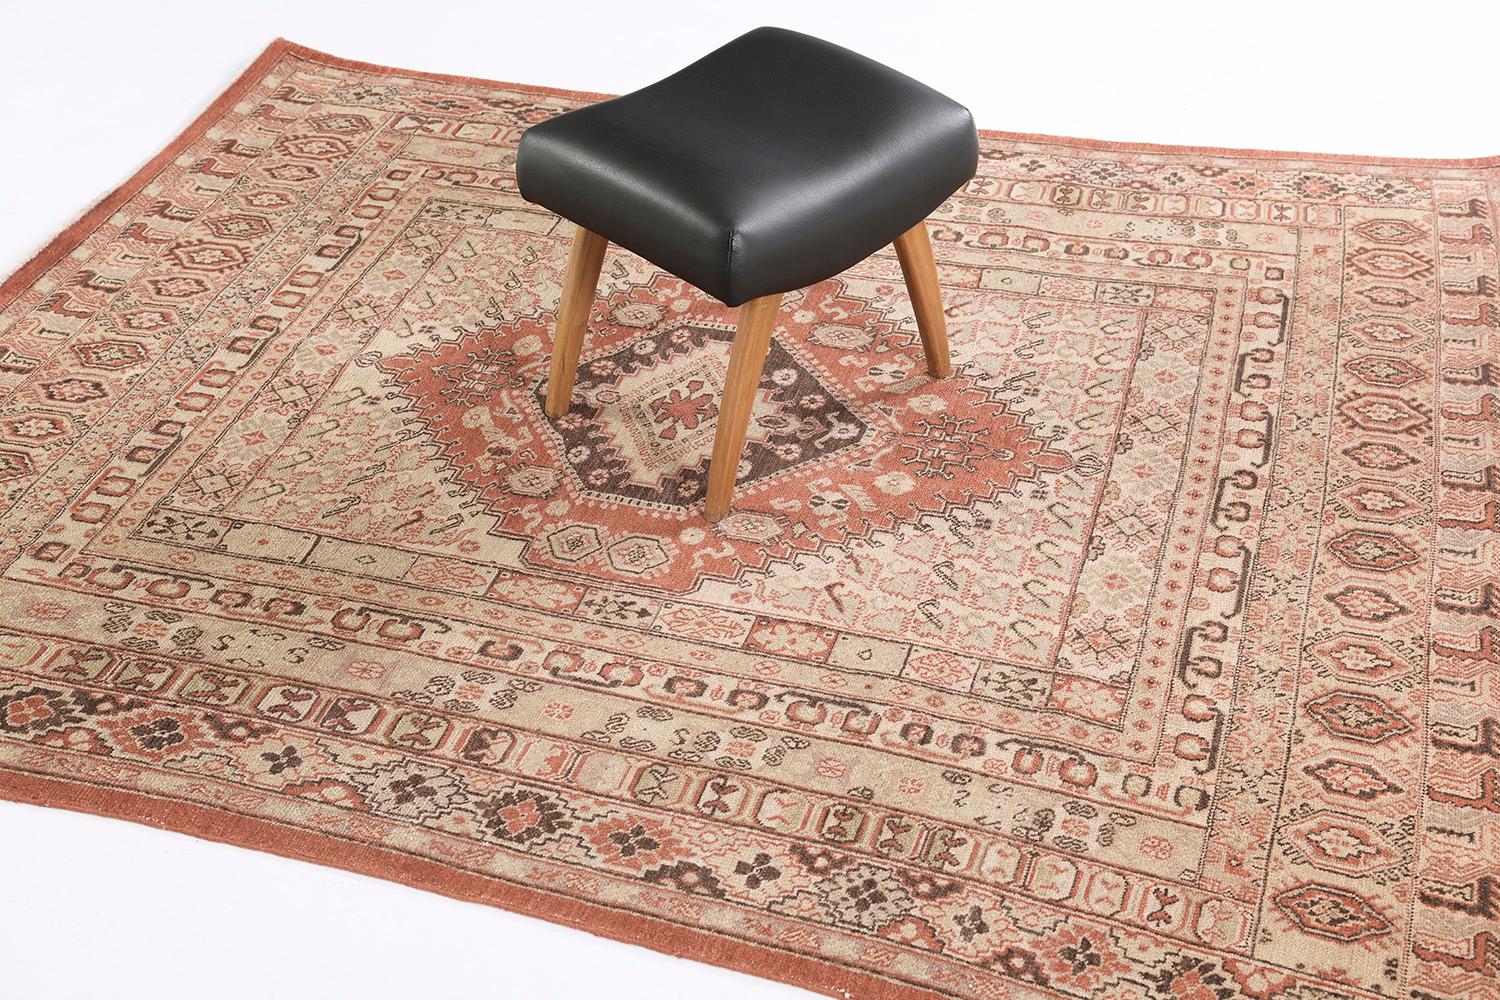 A stylishly luxurious hand-spun wool Gashgai style rug has immensely flexed its series of bands along the perimeter of emblems. It is surrounded by different kinds of intricate symbols and geometric motifs. The rust color scheme is perfect for a